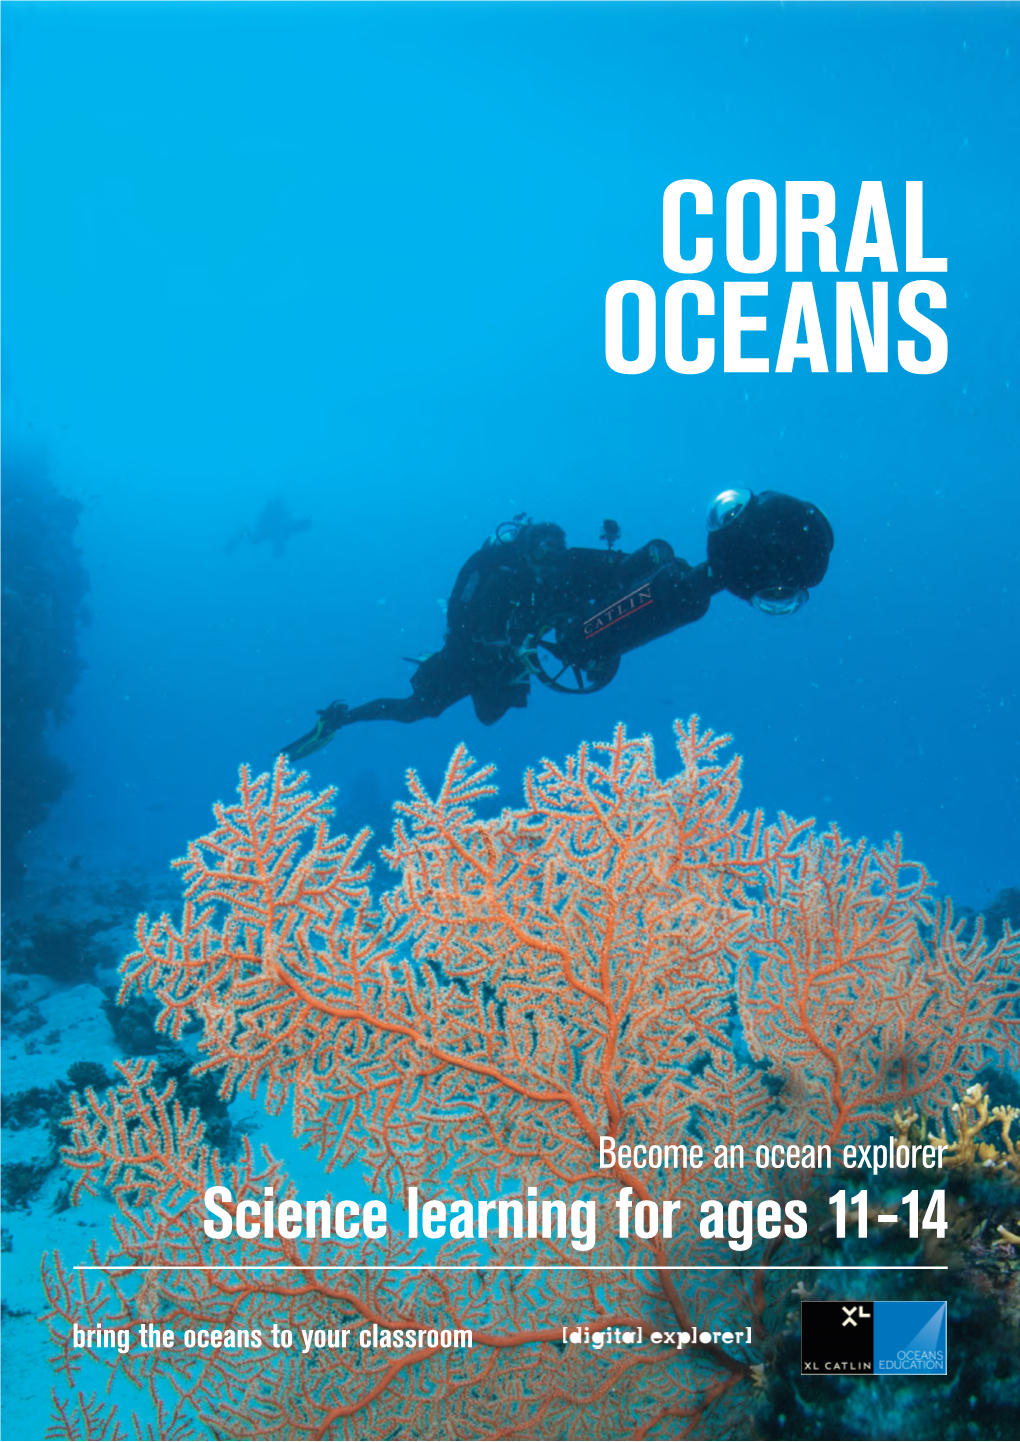 Science Learning for Ages 11-14 Bring the Oceans to Your Classroom 01